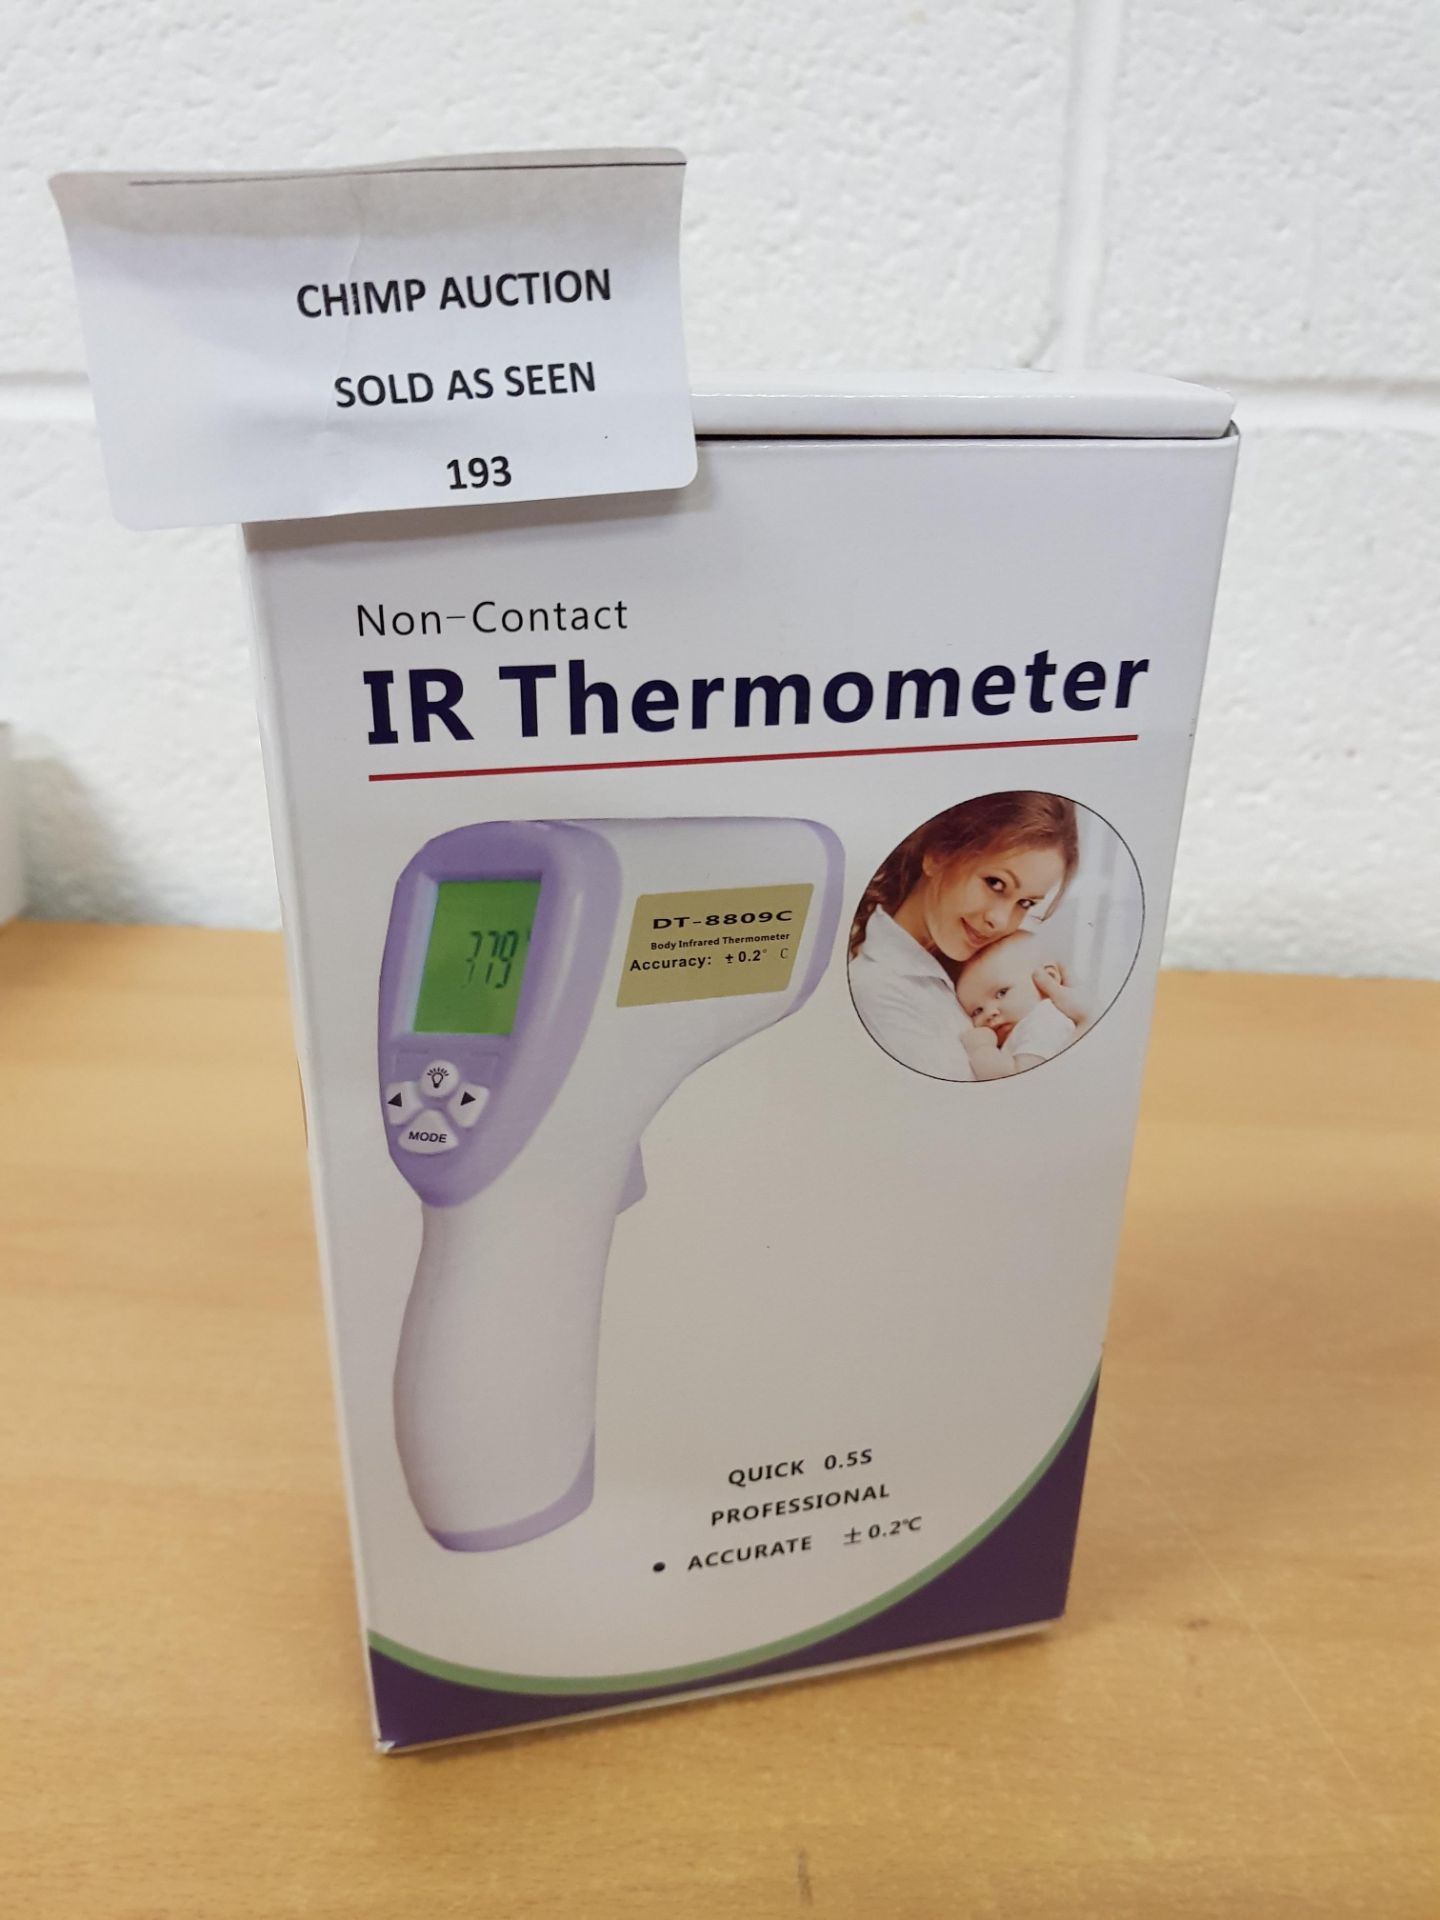 Non-Contact IR Thermometer